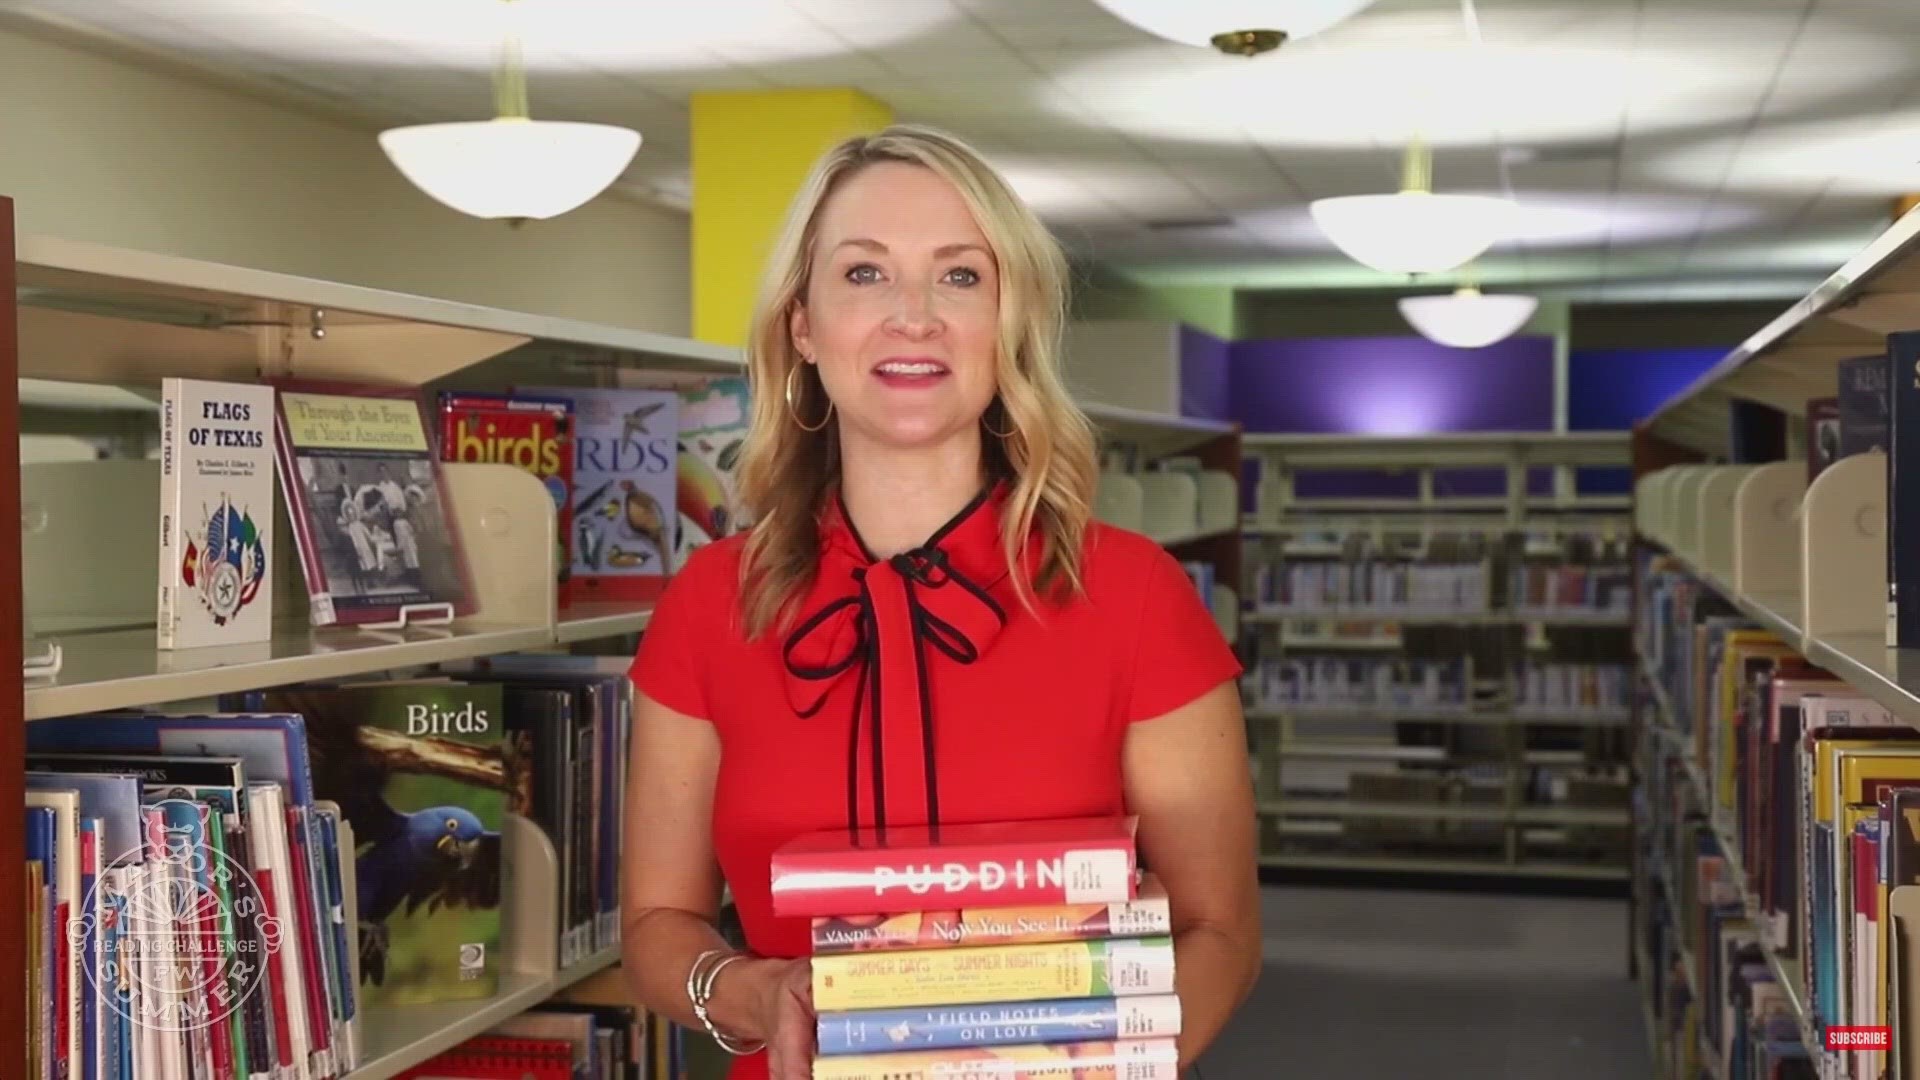 After the Mayor Parker received complaints, she directed the Fort Worth Public Library to remove the Pride portion of the Mayor's Summer Reading Challenge.